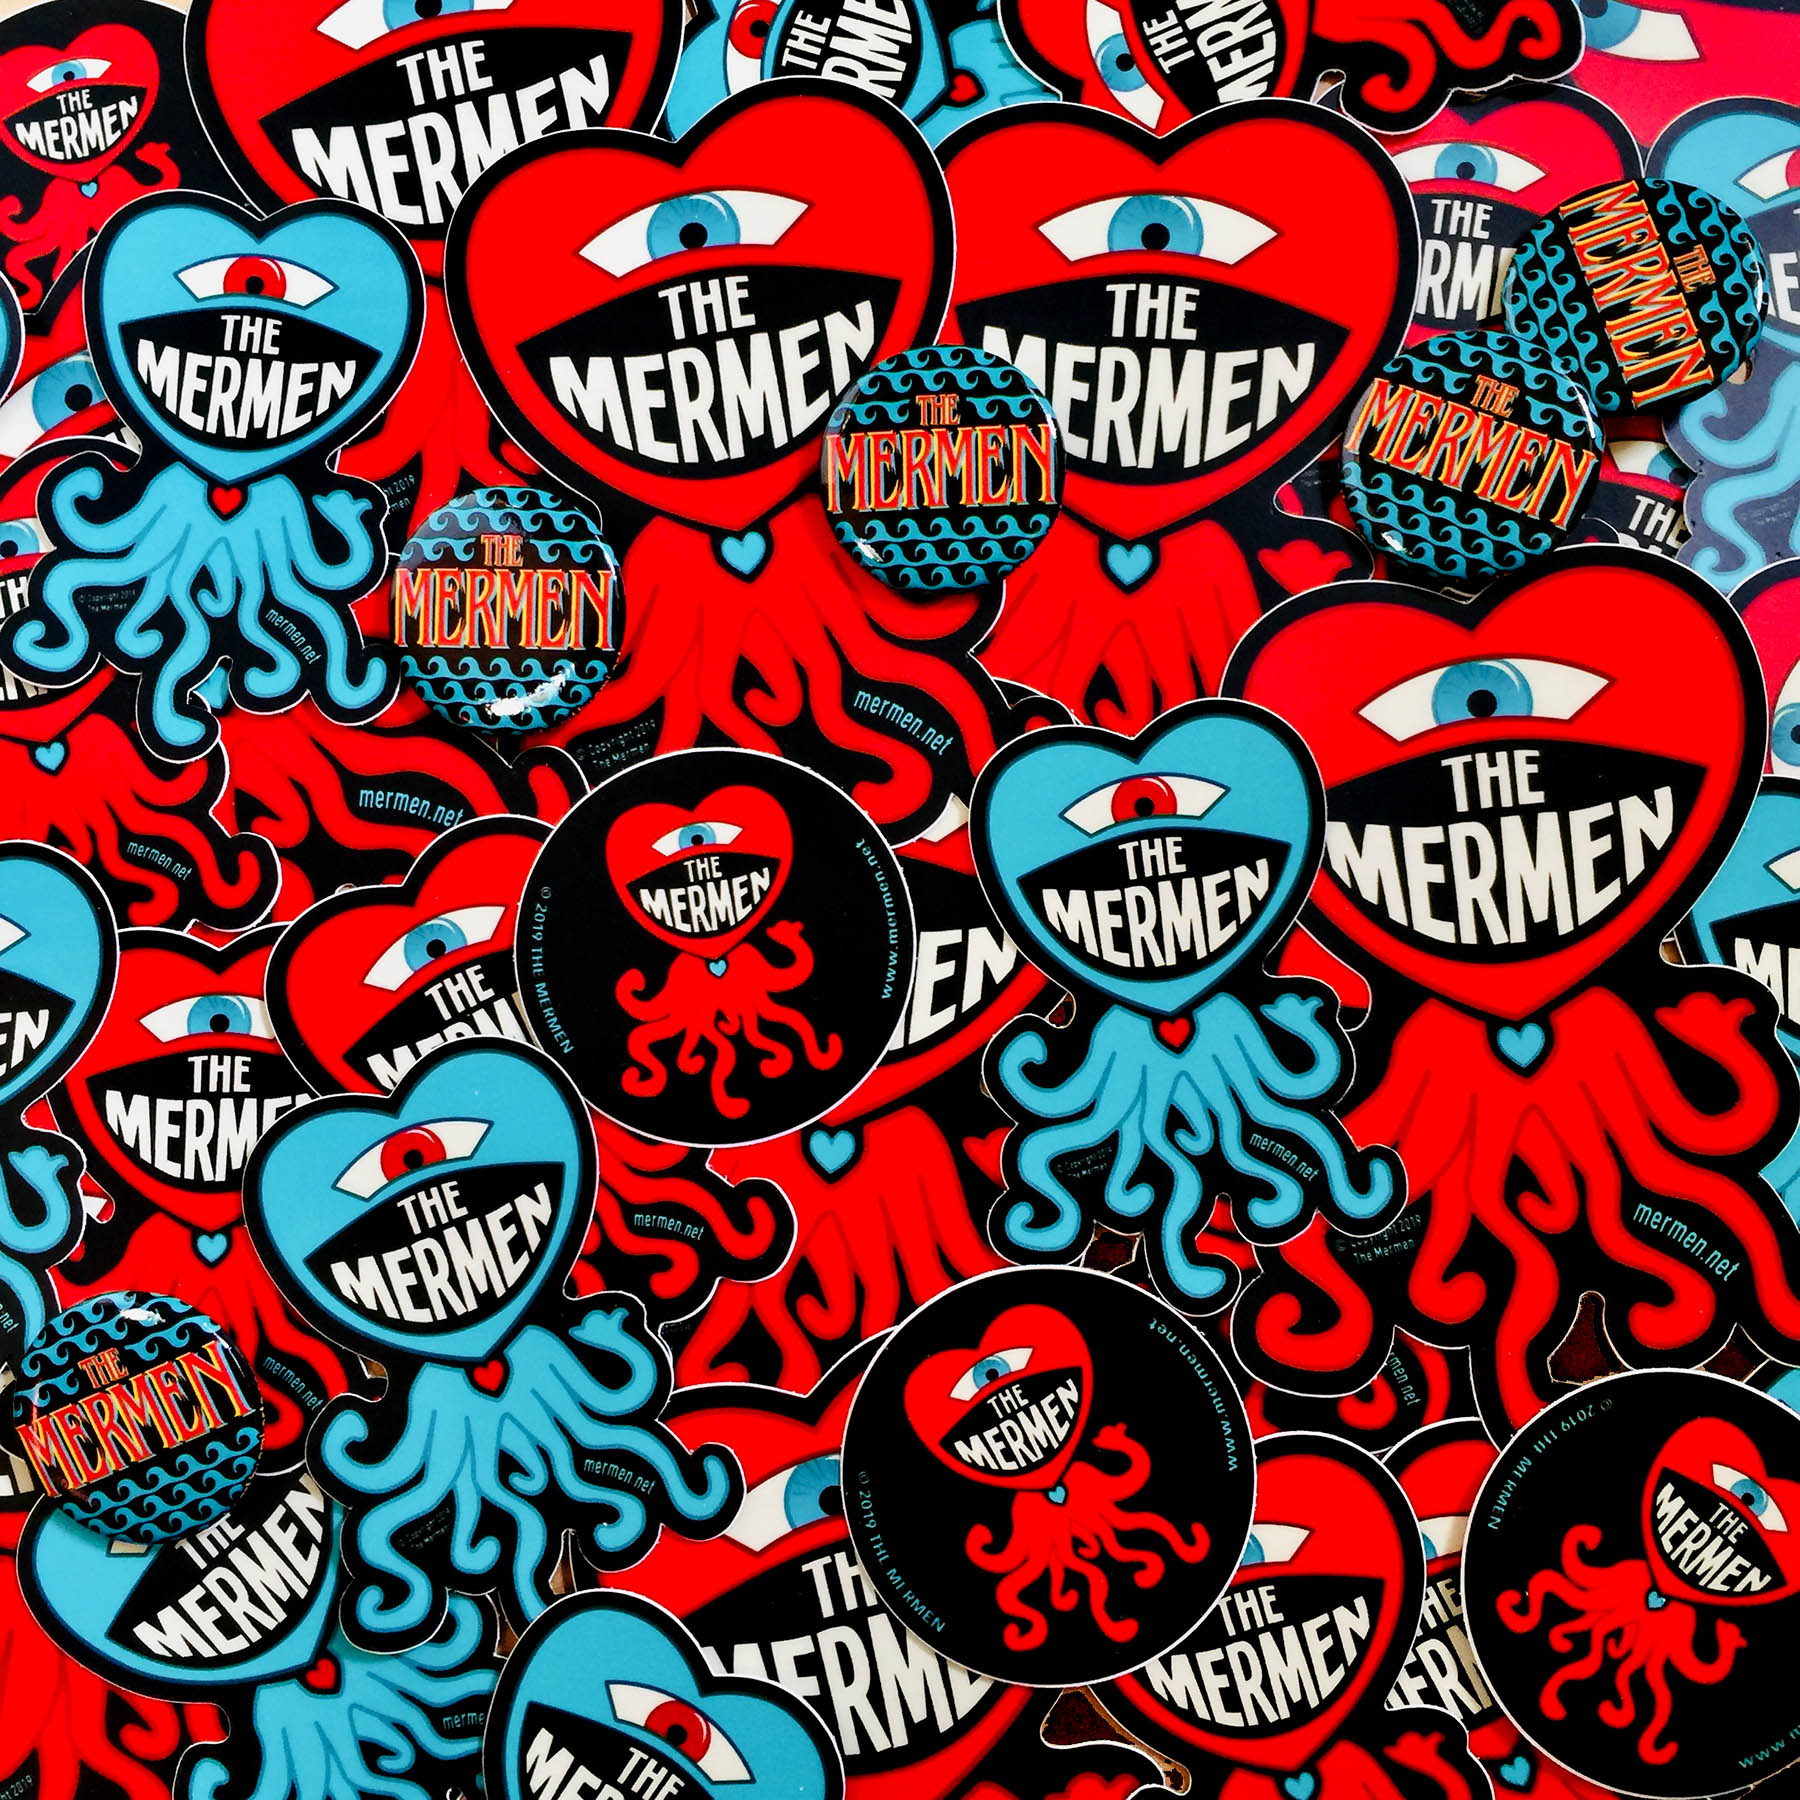 The Mermen Stickers and Buttons. Sticker and button design by em. photo by emi